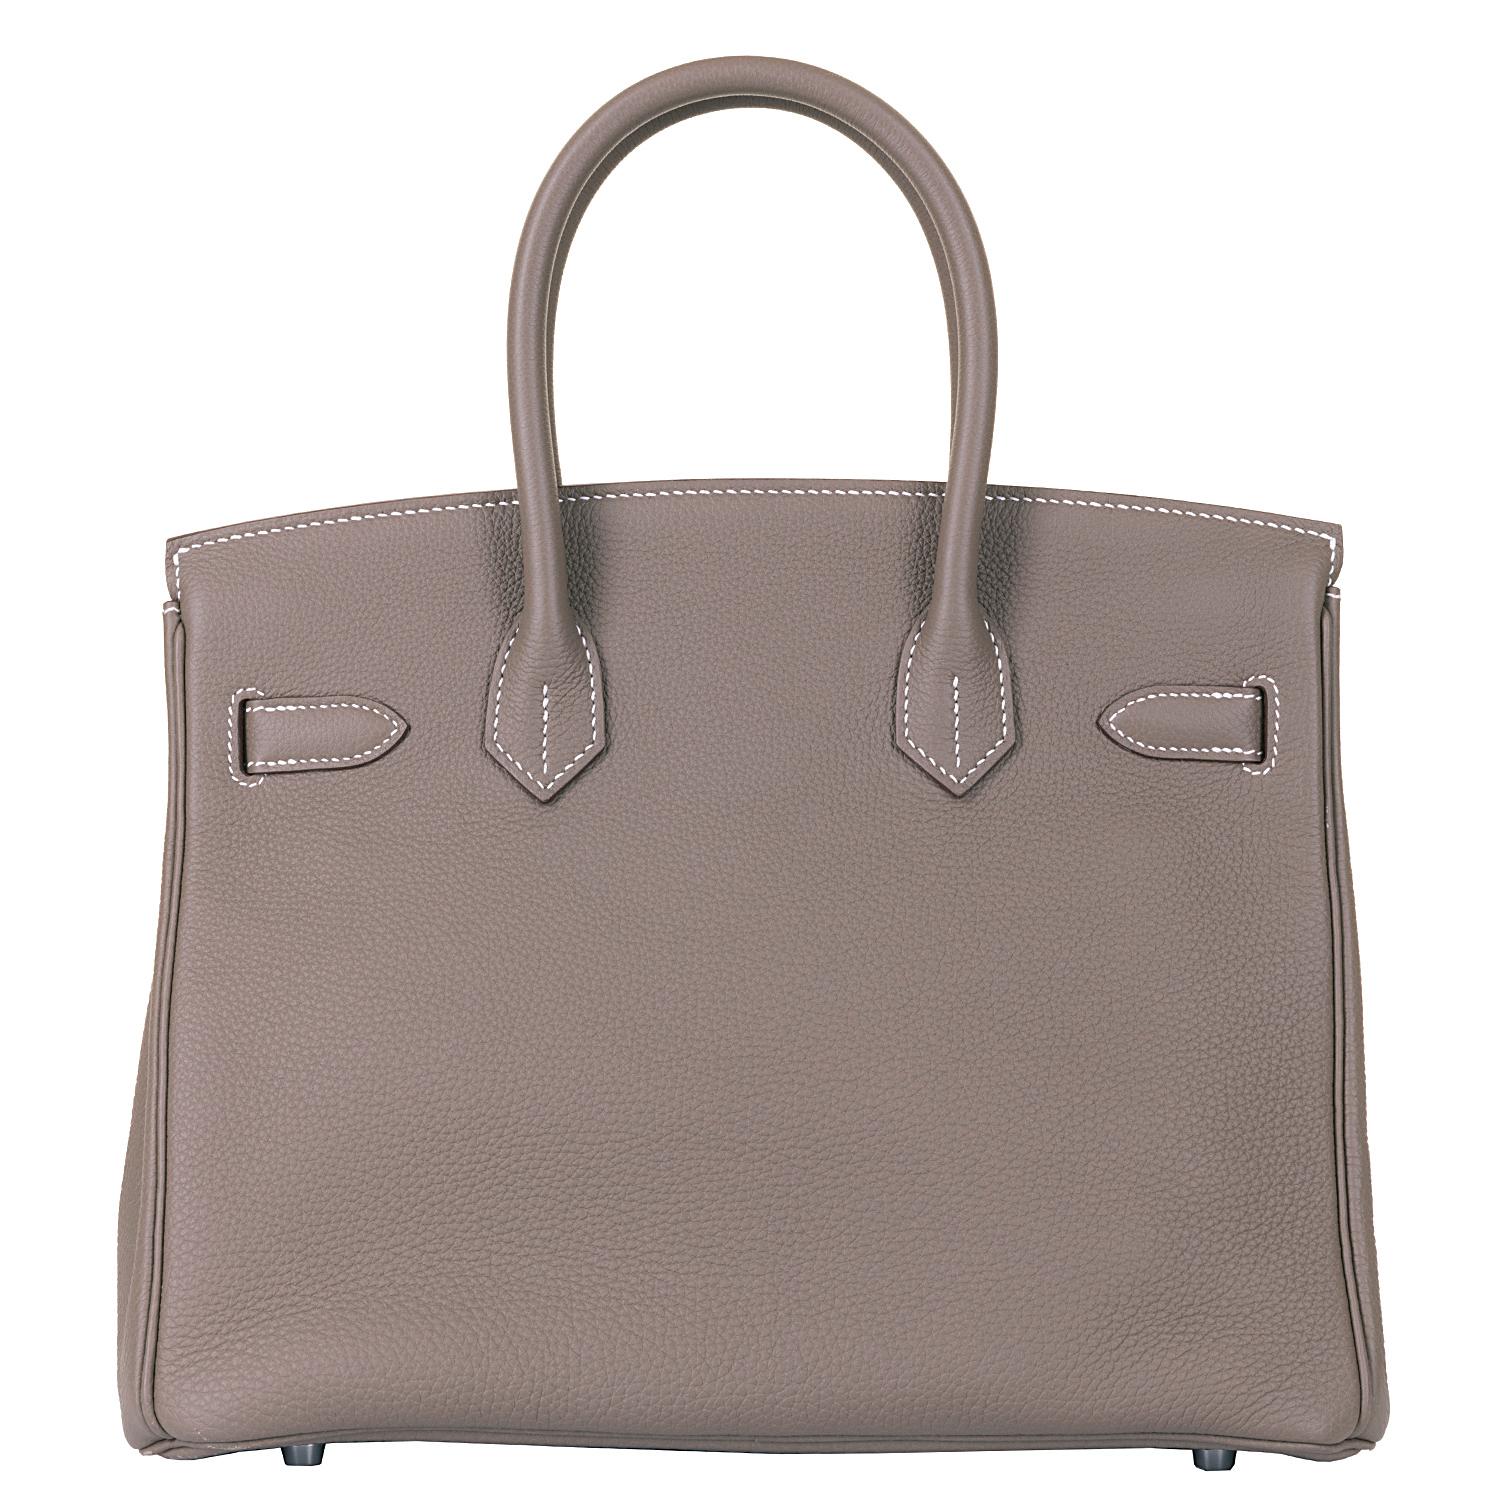 This fabulous Hermes Birkin 30 Bag is finished in 'Etoupe' Togo leather, accented with Palladium hardware. Togo is the most popular Hermes leather for Birkin bags, with its grained textured finish, it is both anti-scratch and lightweight, yet always